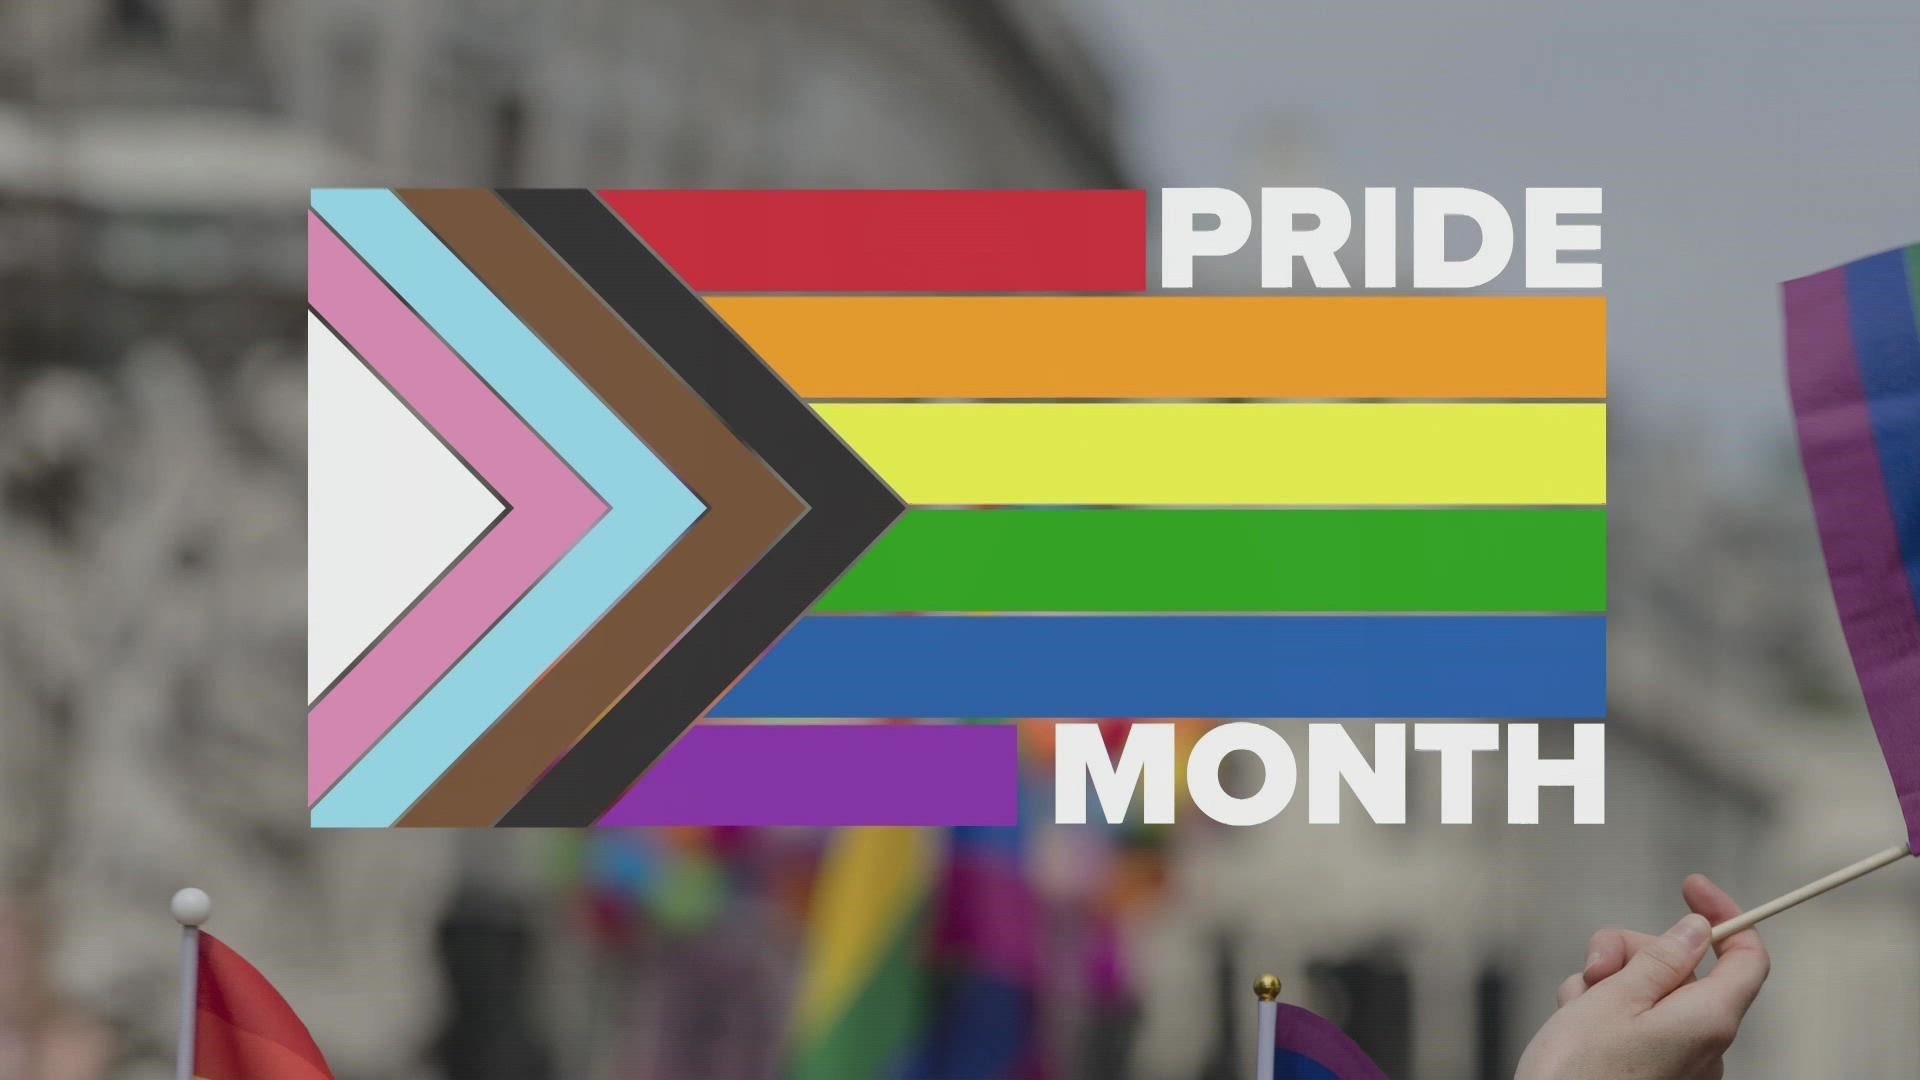 Pride events across central Ohio are kicking off this week. For many, it's the first time they're being held in person since the pandemic.